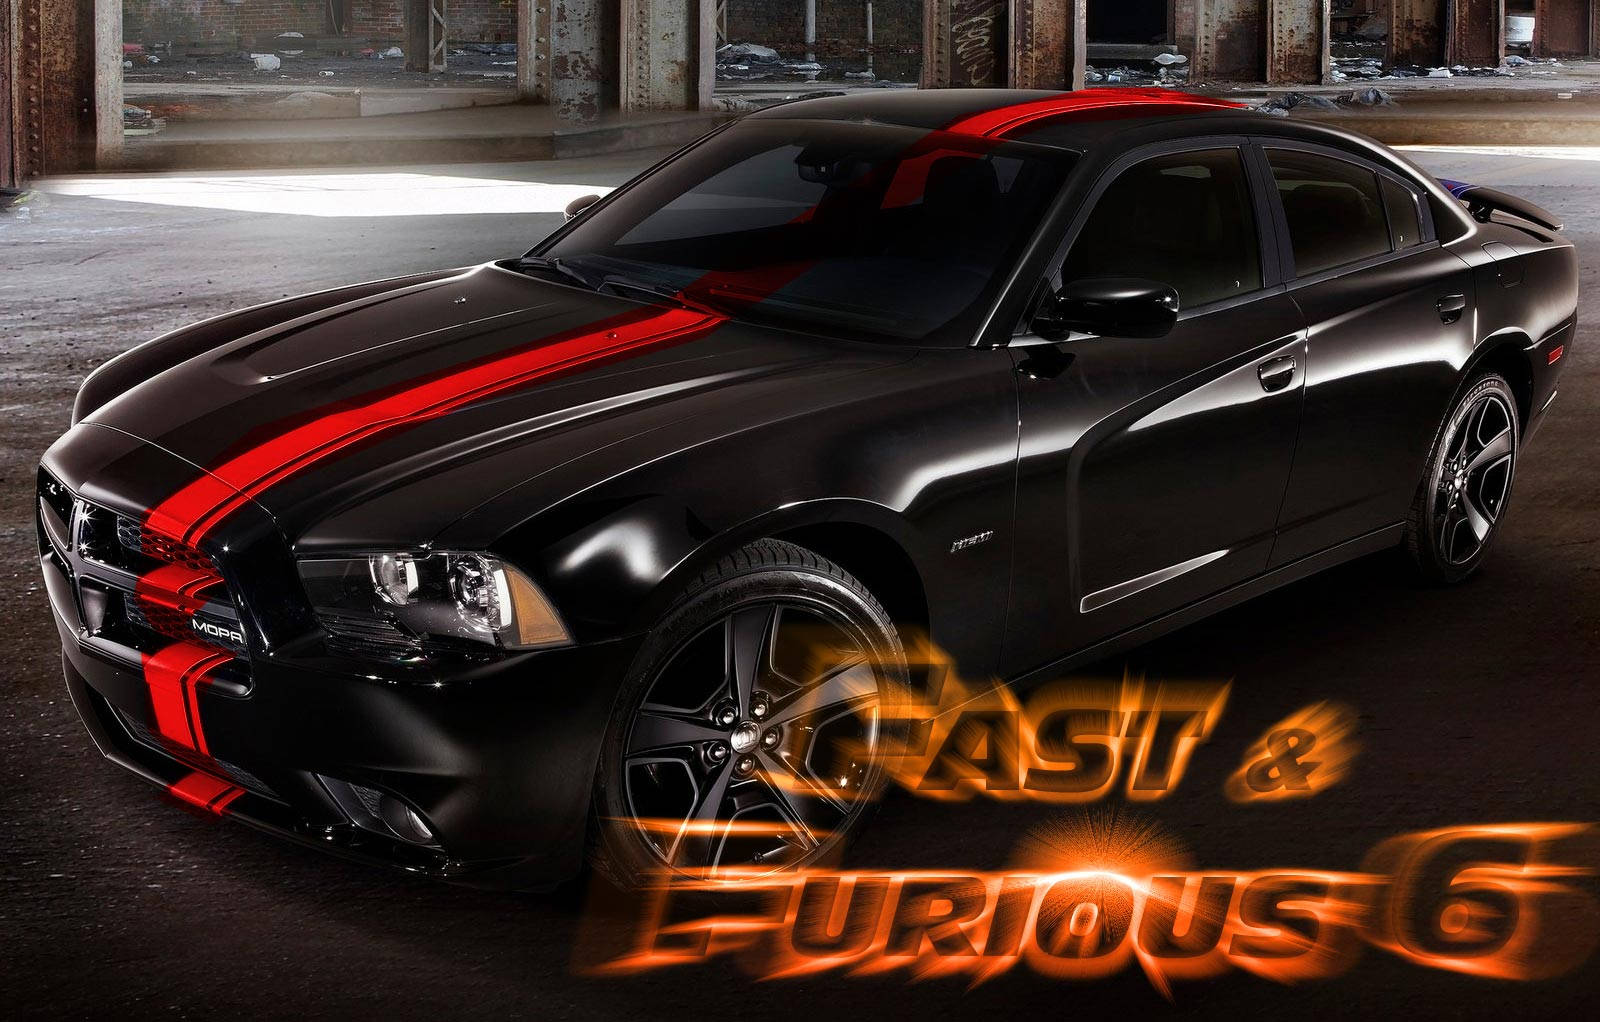 Fast And Furious 6 Cars Black And Red Fire Aesthetic Wallpaper